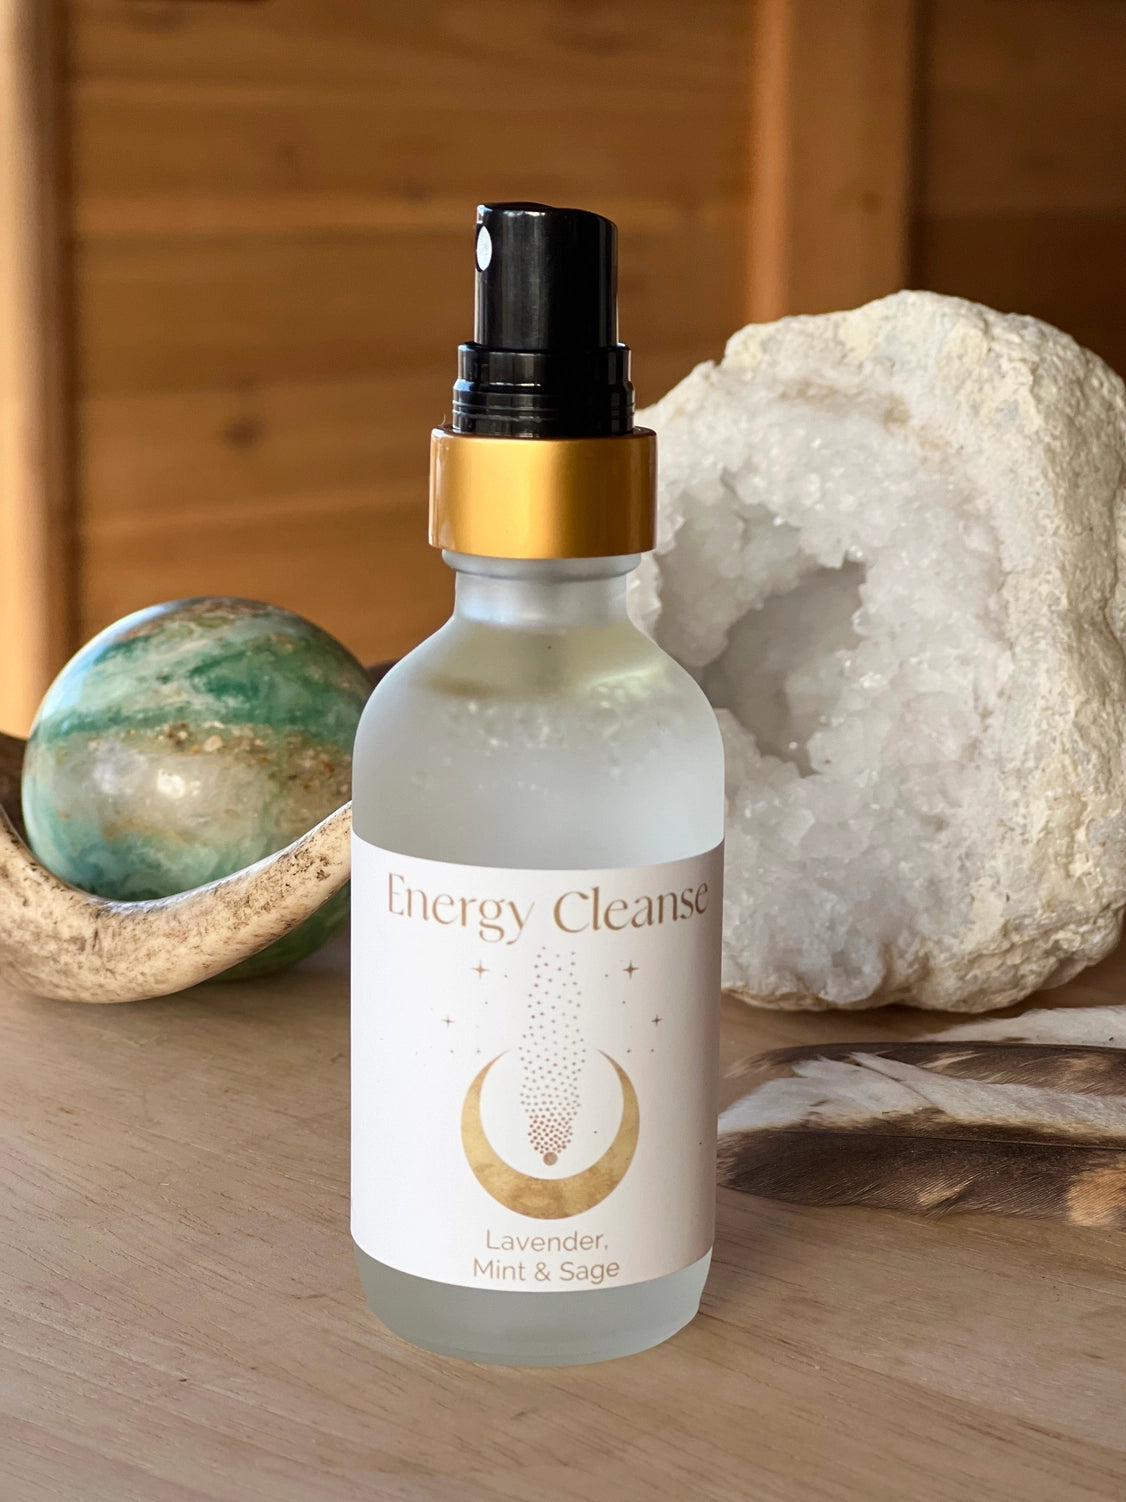 Energy Cleanse Aromatherapy Body & Room Myst